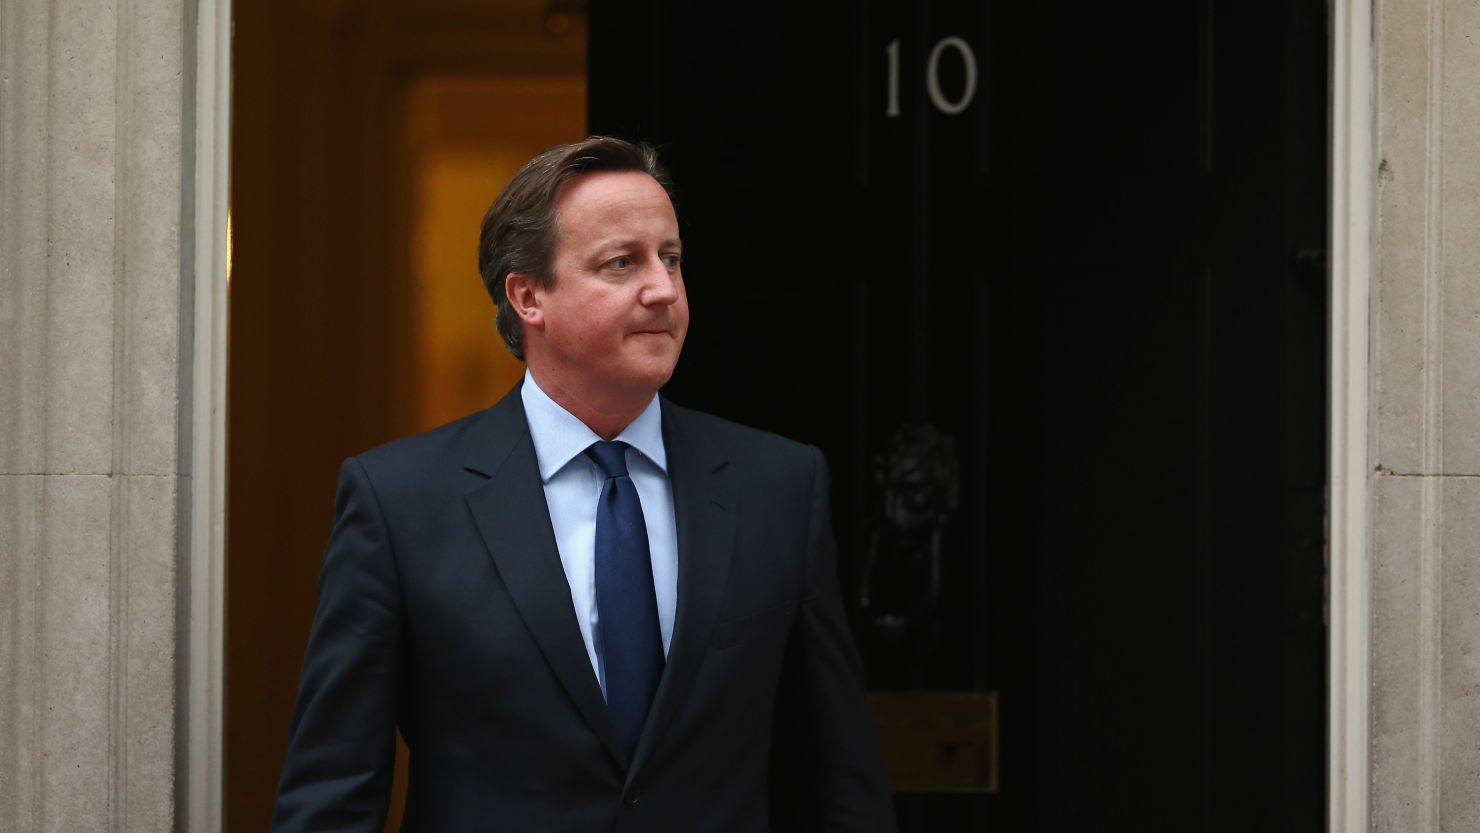 British Prime Minister David Cameron has weighed into the debate surrounding the use of the word 'yid'.